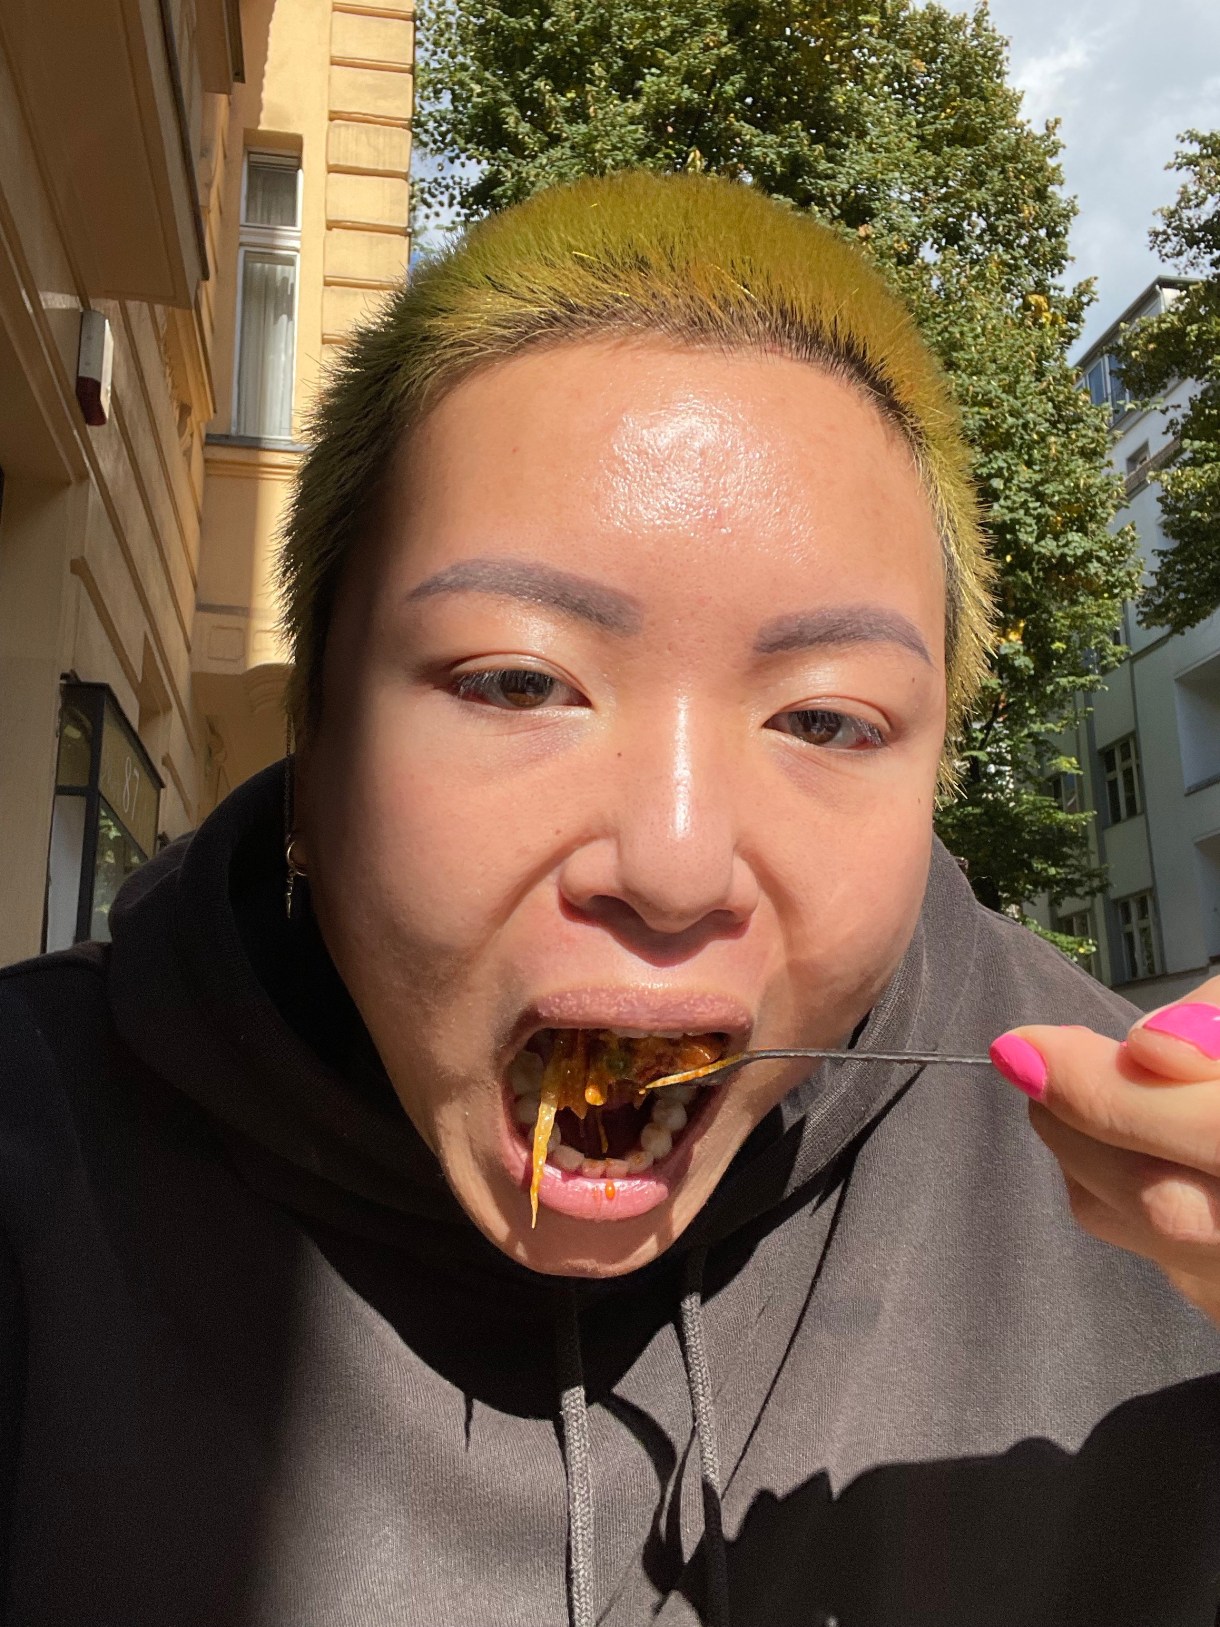 viv is an asian human here eating out of doors, their mouth super wide open. they have dyed green hair and pink finger nails and are wearing a hoodie